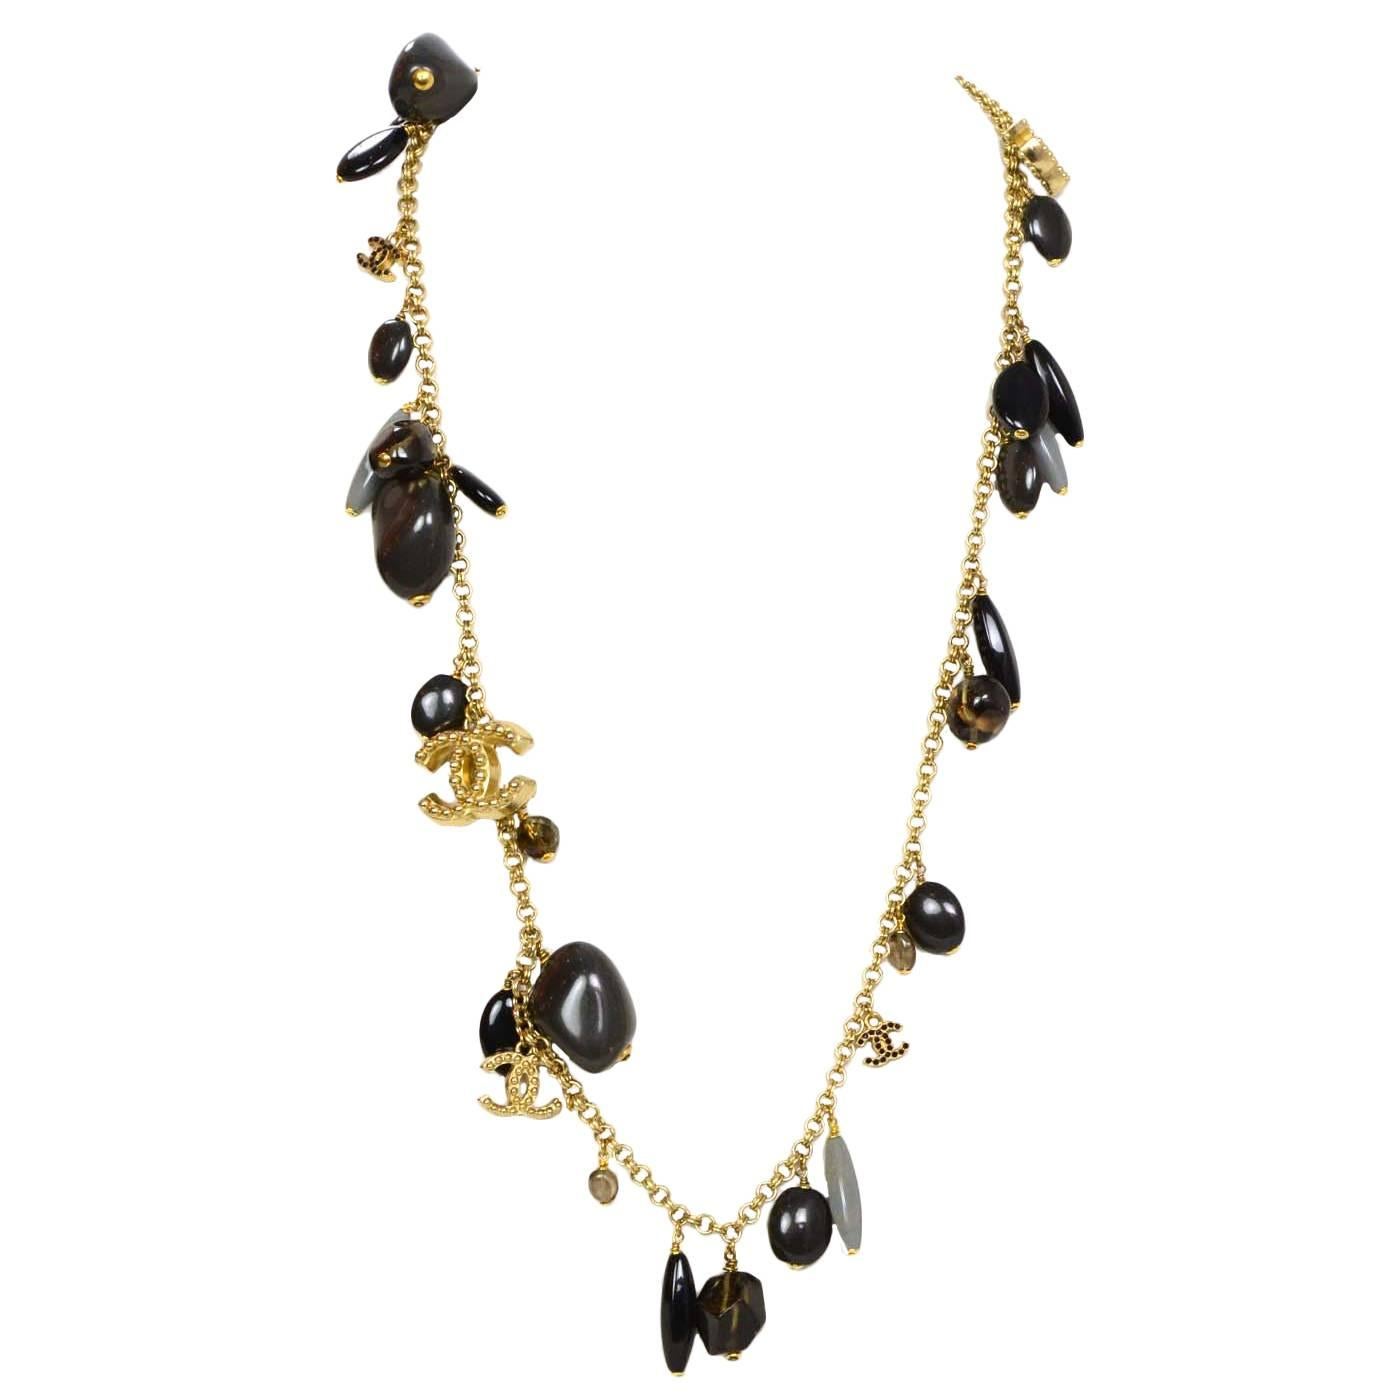 Chanel Grey & Brown Stone Pendant Long Necklace 

Features goldtone CC's throughout with black crystals
Color: Goldtone, black, brown, and grey
Materials: Metal, stone, and crystal
Closure: Lobster claw closure
Overall Condition: Excellent pre-owned